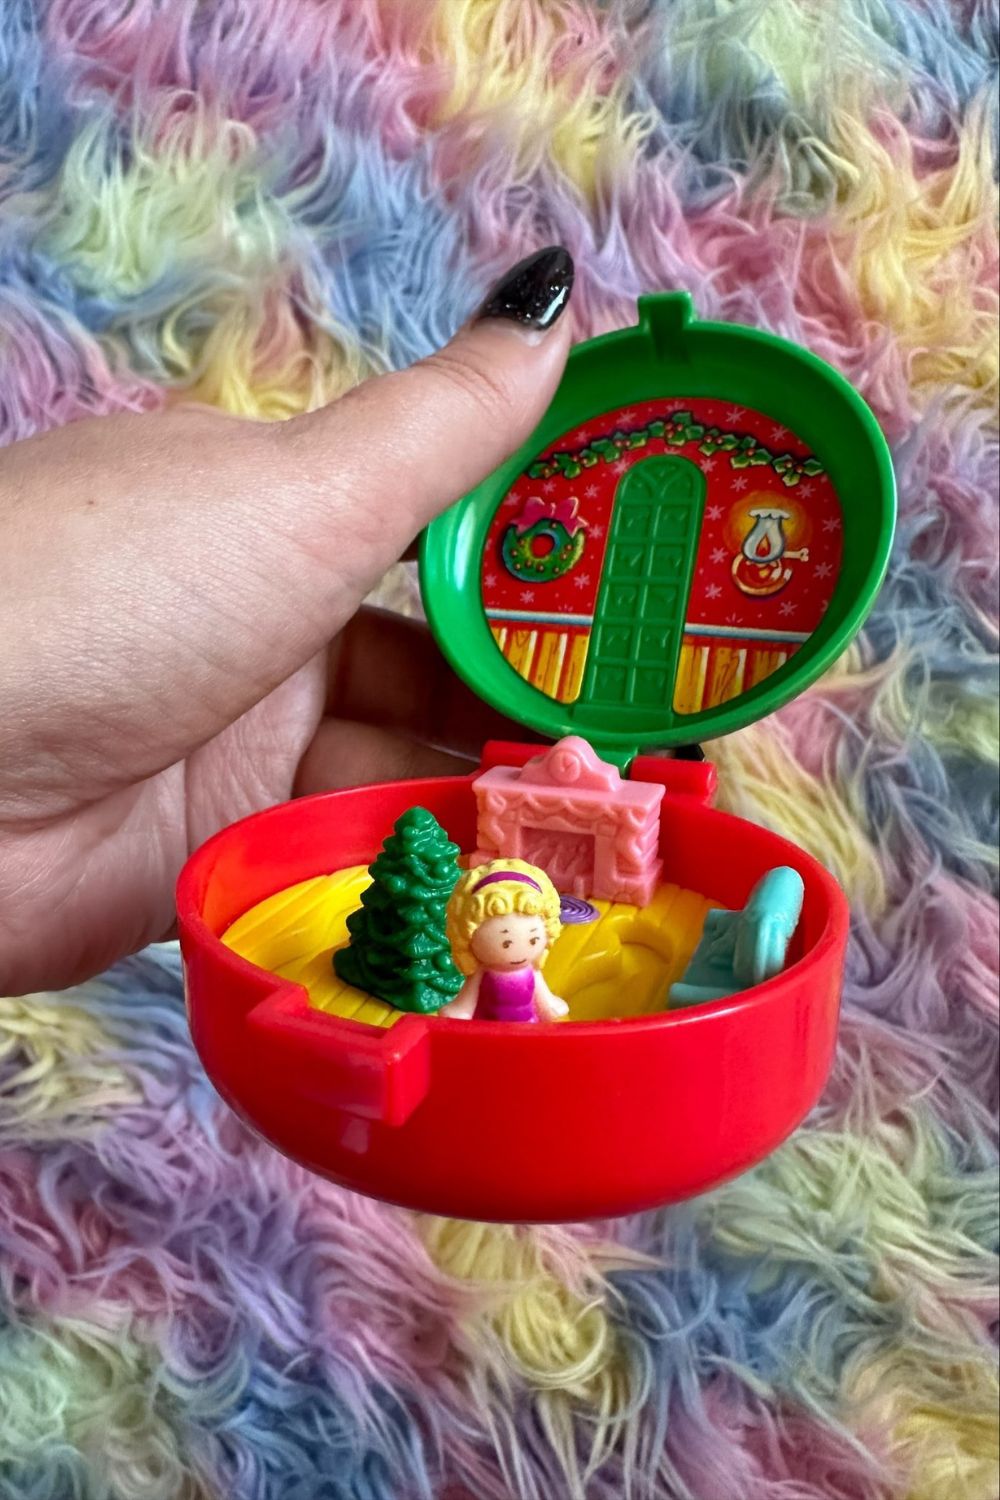 1993 MCDONALDS POLLY POCKET PLAYSET TOTALLY TOY HOLIDAY COMPACT CHRISTMAS WREATH*